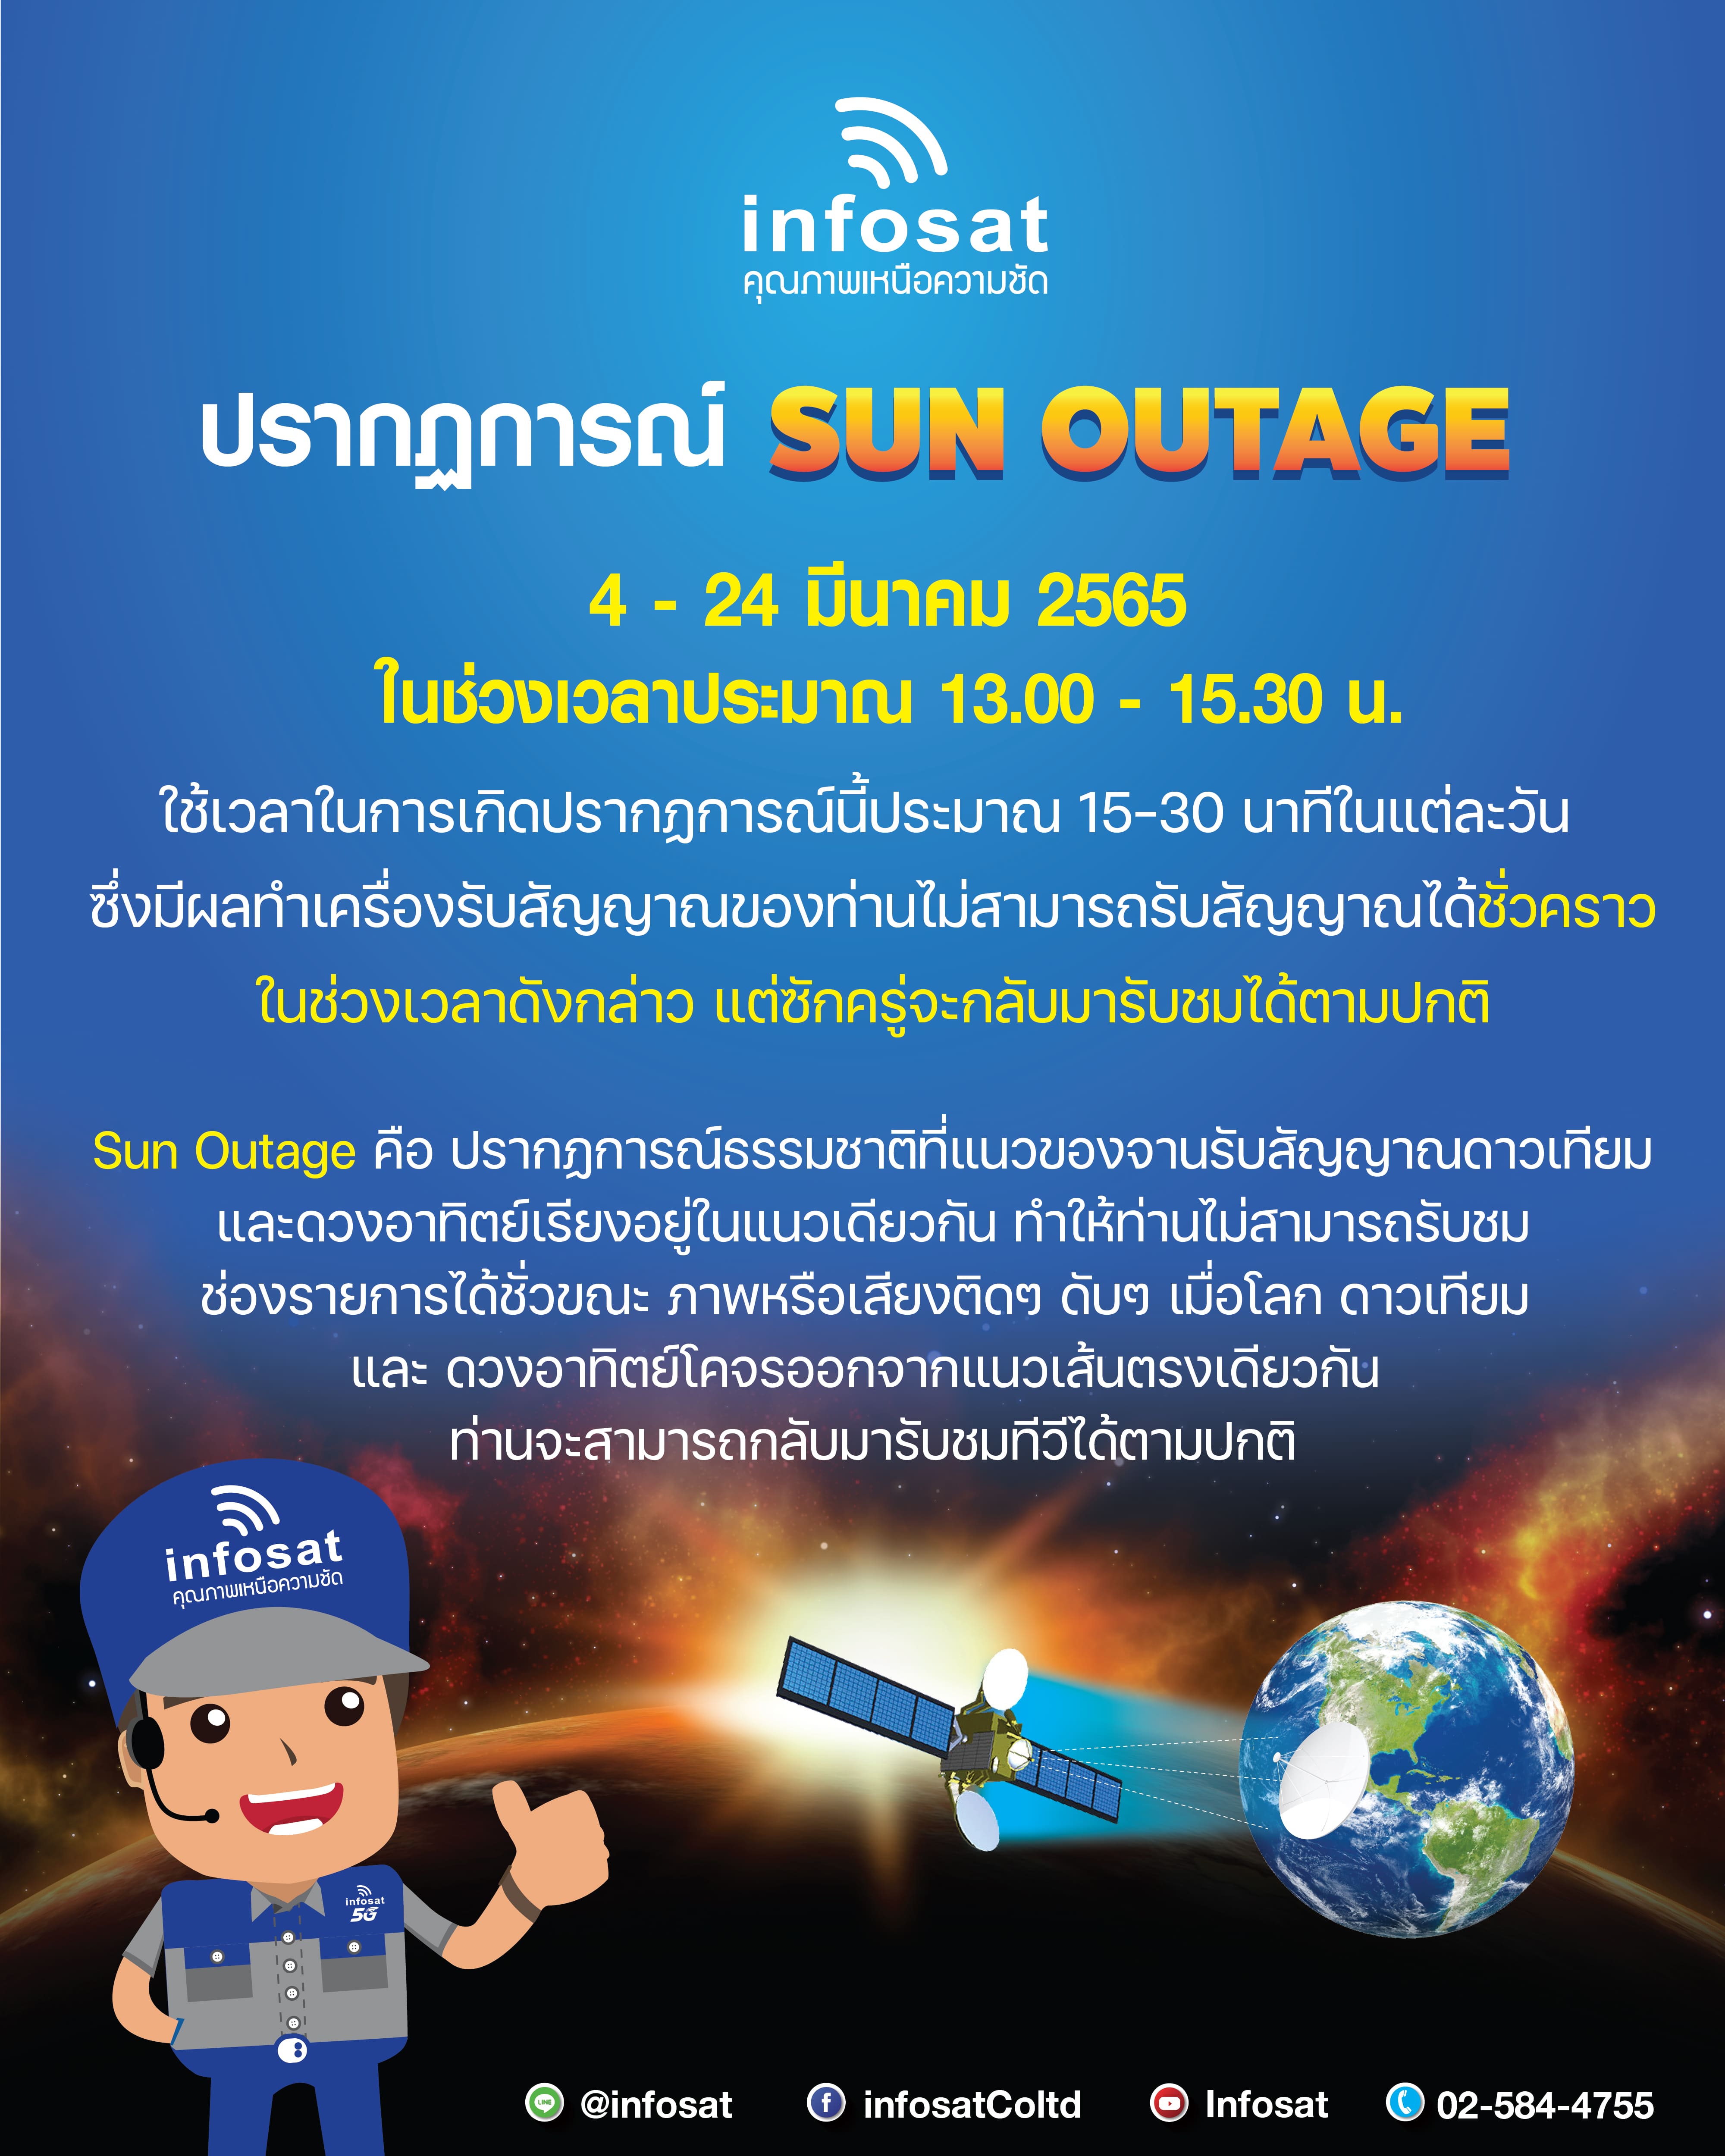 Sun Outage 4-24 March 2022